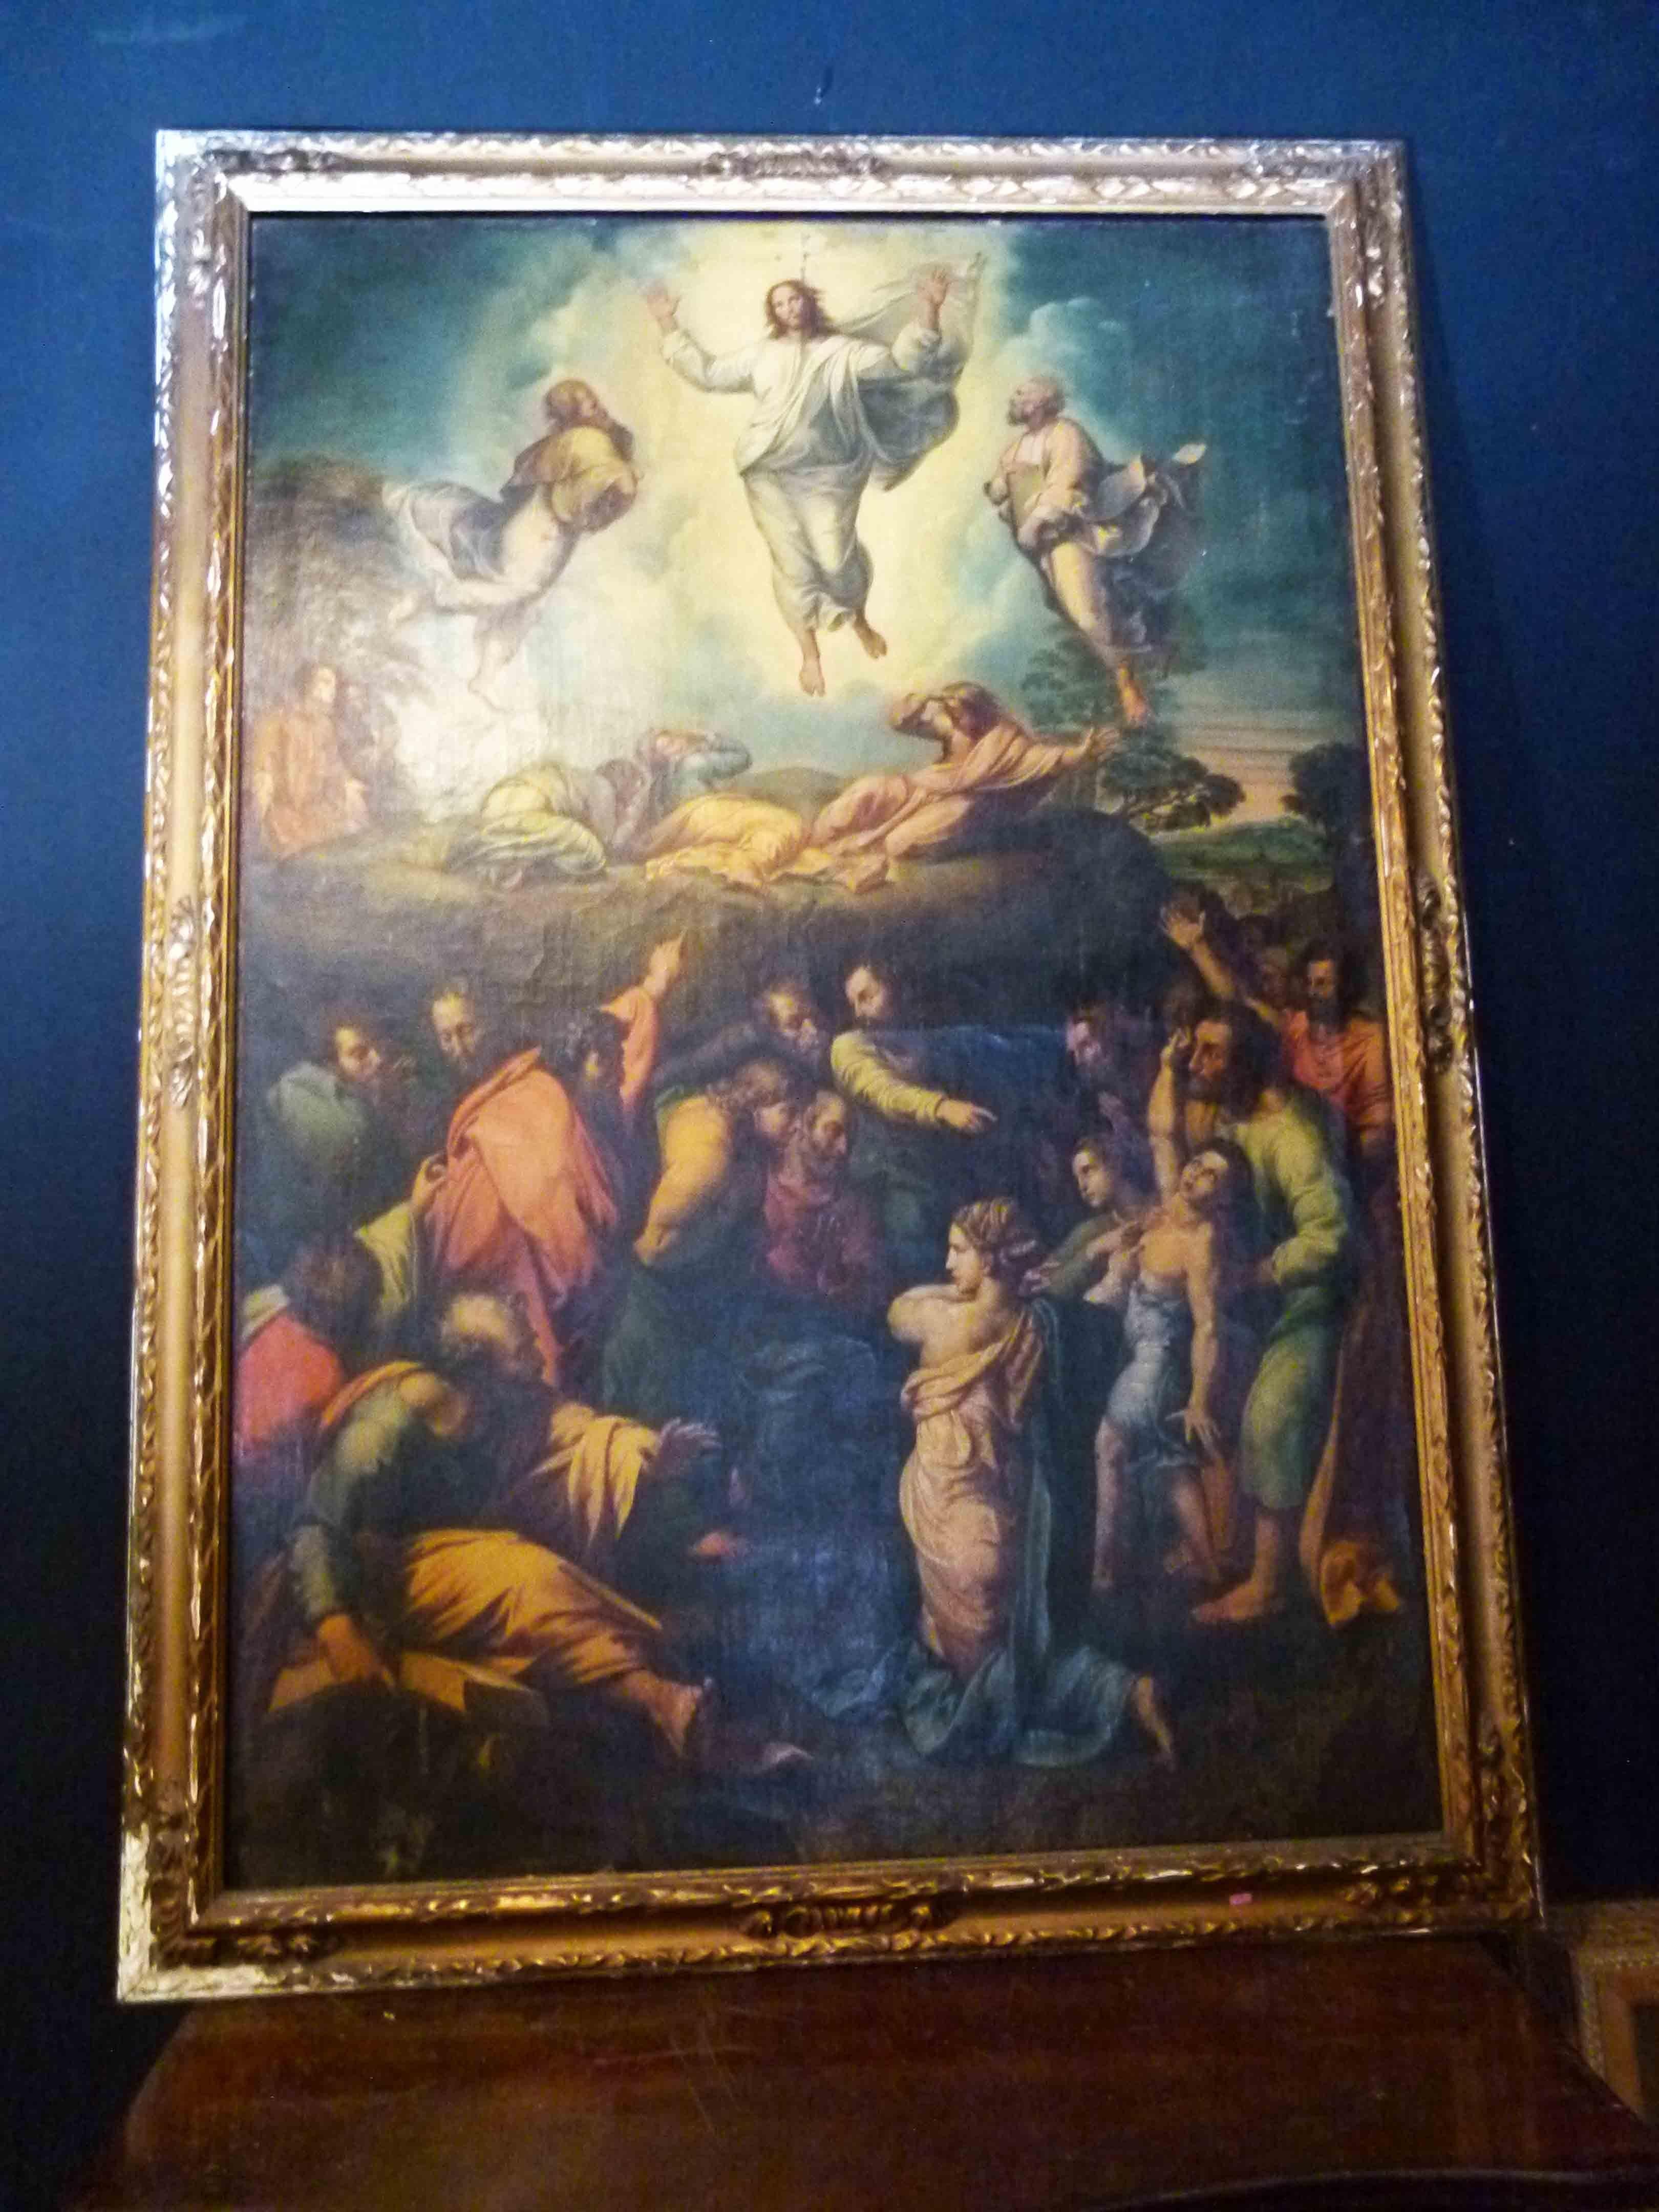 Oil painting reproduction of Raphael's the transfiguration.

The transfiguration is the last painting by the Italian High Renaissance master Raphael.
From the late 16th-early 20th century, it was said to be the most famous painting in the